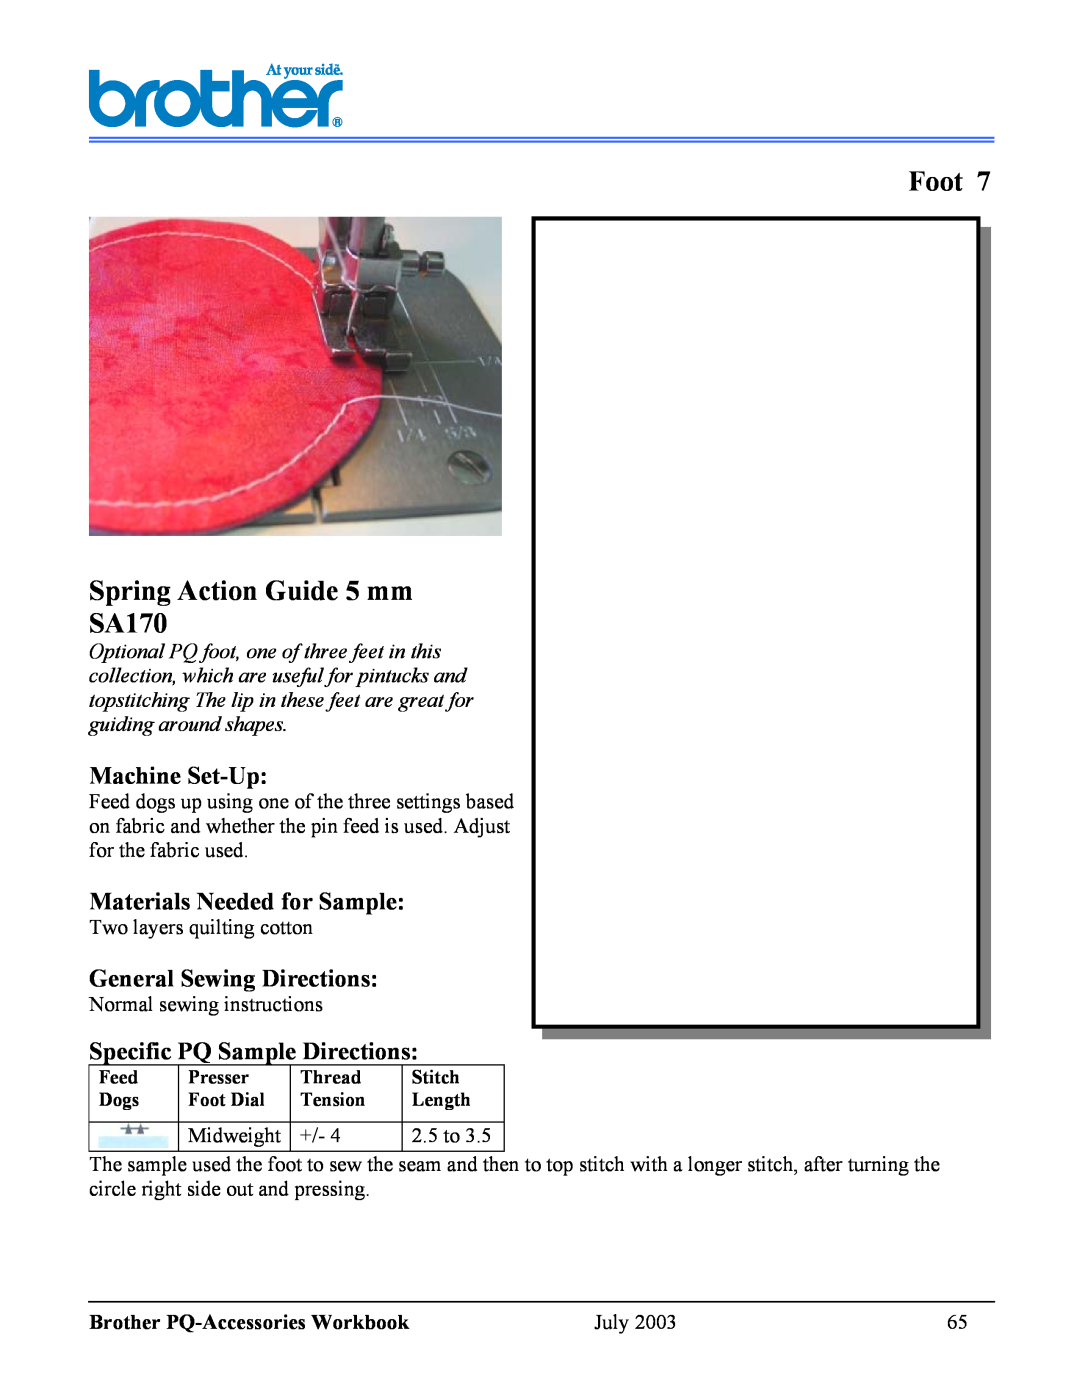 Brother 1300 Foot Spring Action Guide 5 mm SA170, Machine Set-Up, Materials Needed for Sample, General Sewing Directions 